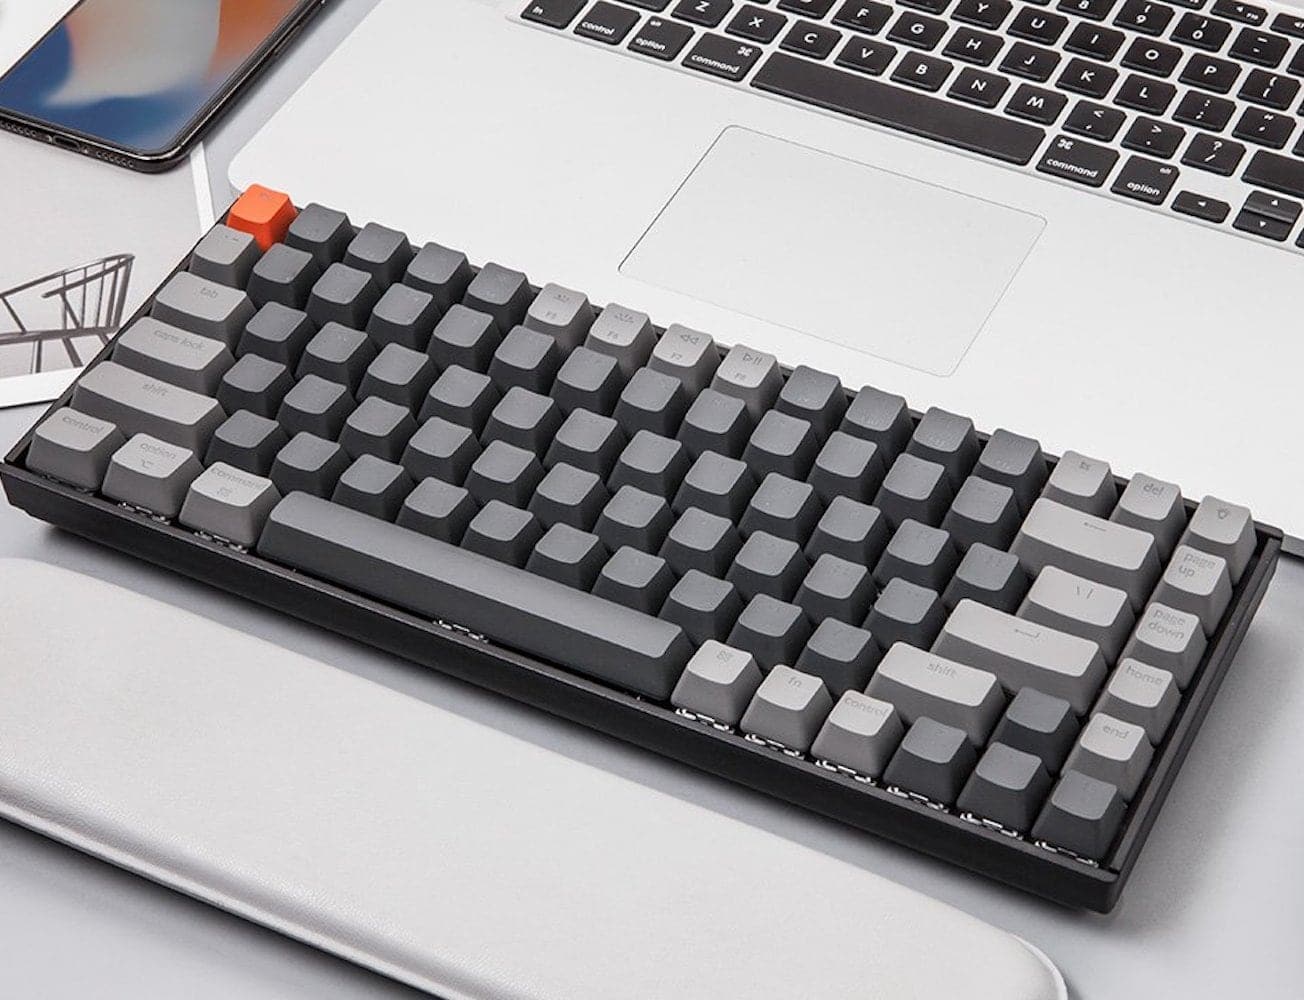 The Keychron K2 is one of the only mechanical keyboards that also works with the iPad. 